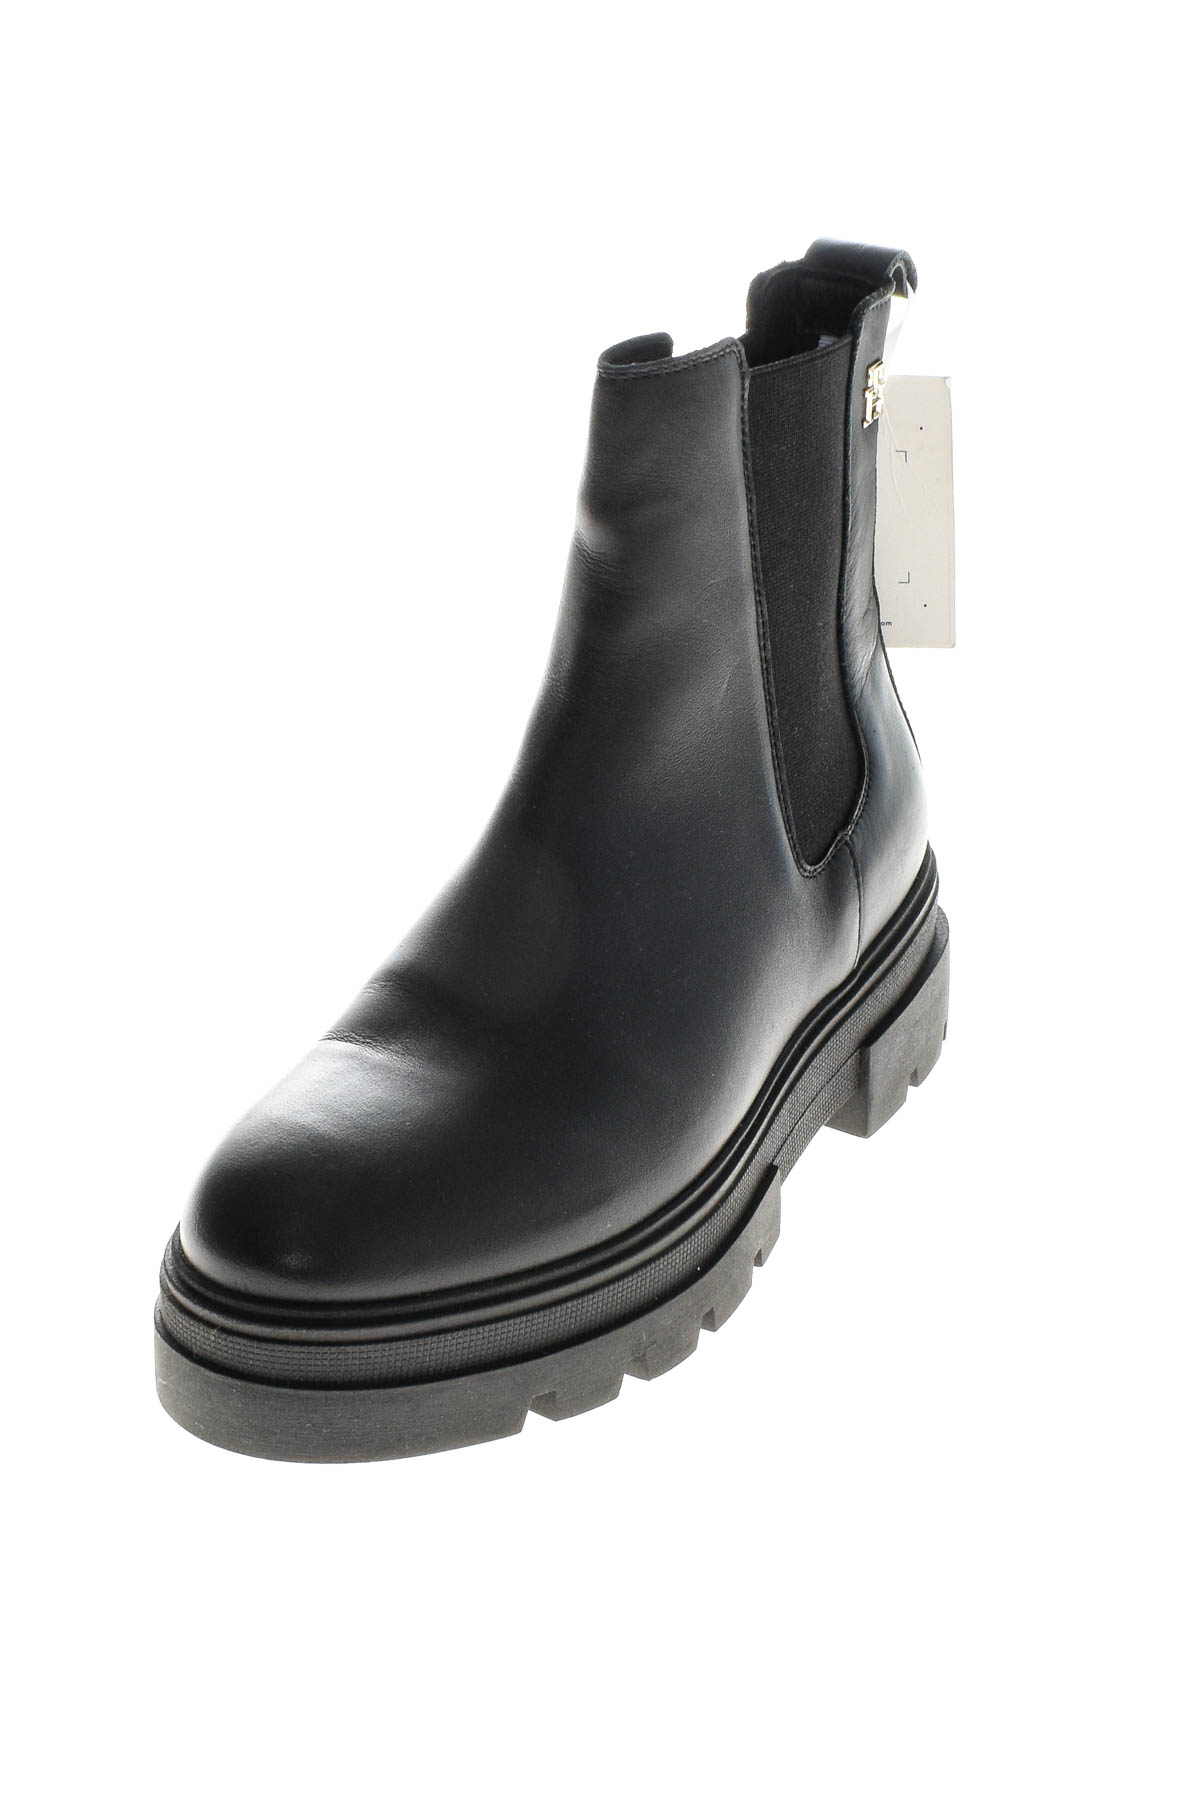 Women's boots - TOMMY HILFIGER - 1